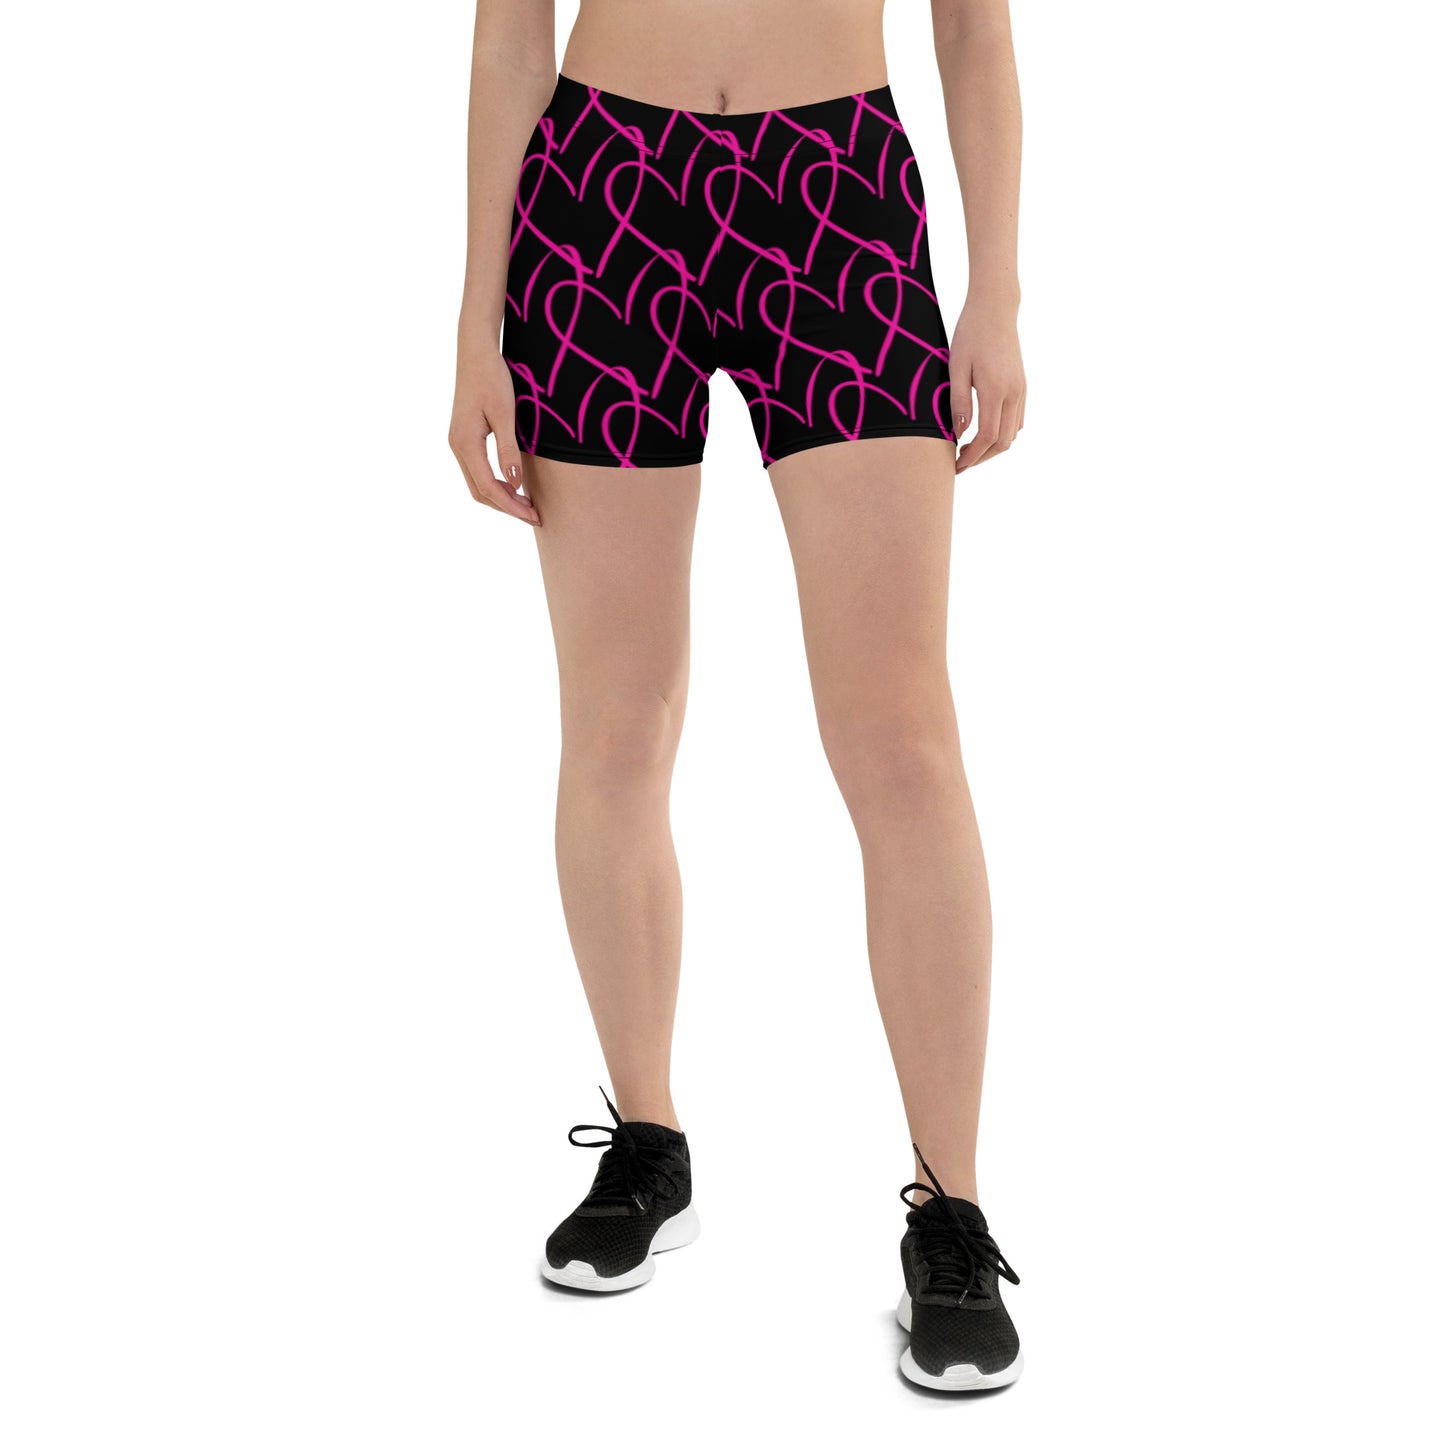 ICONIC Heart Compression Shorts